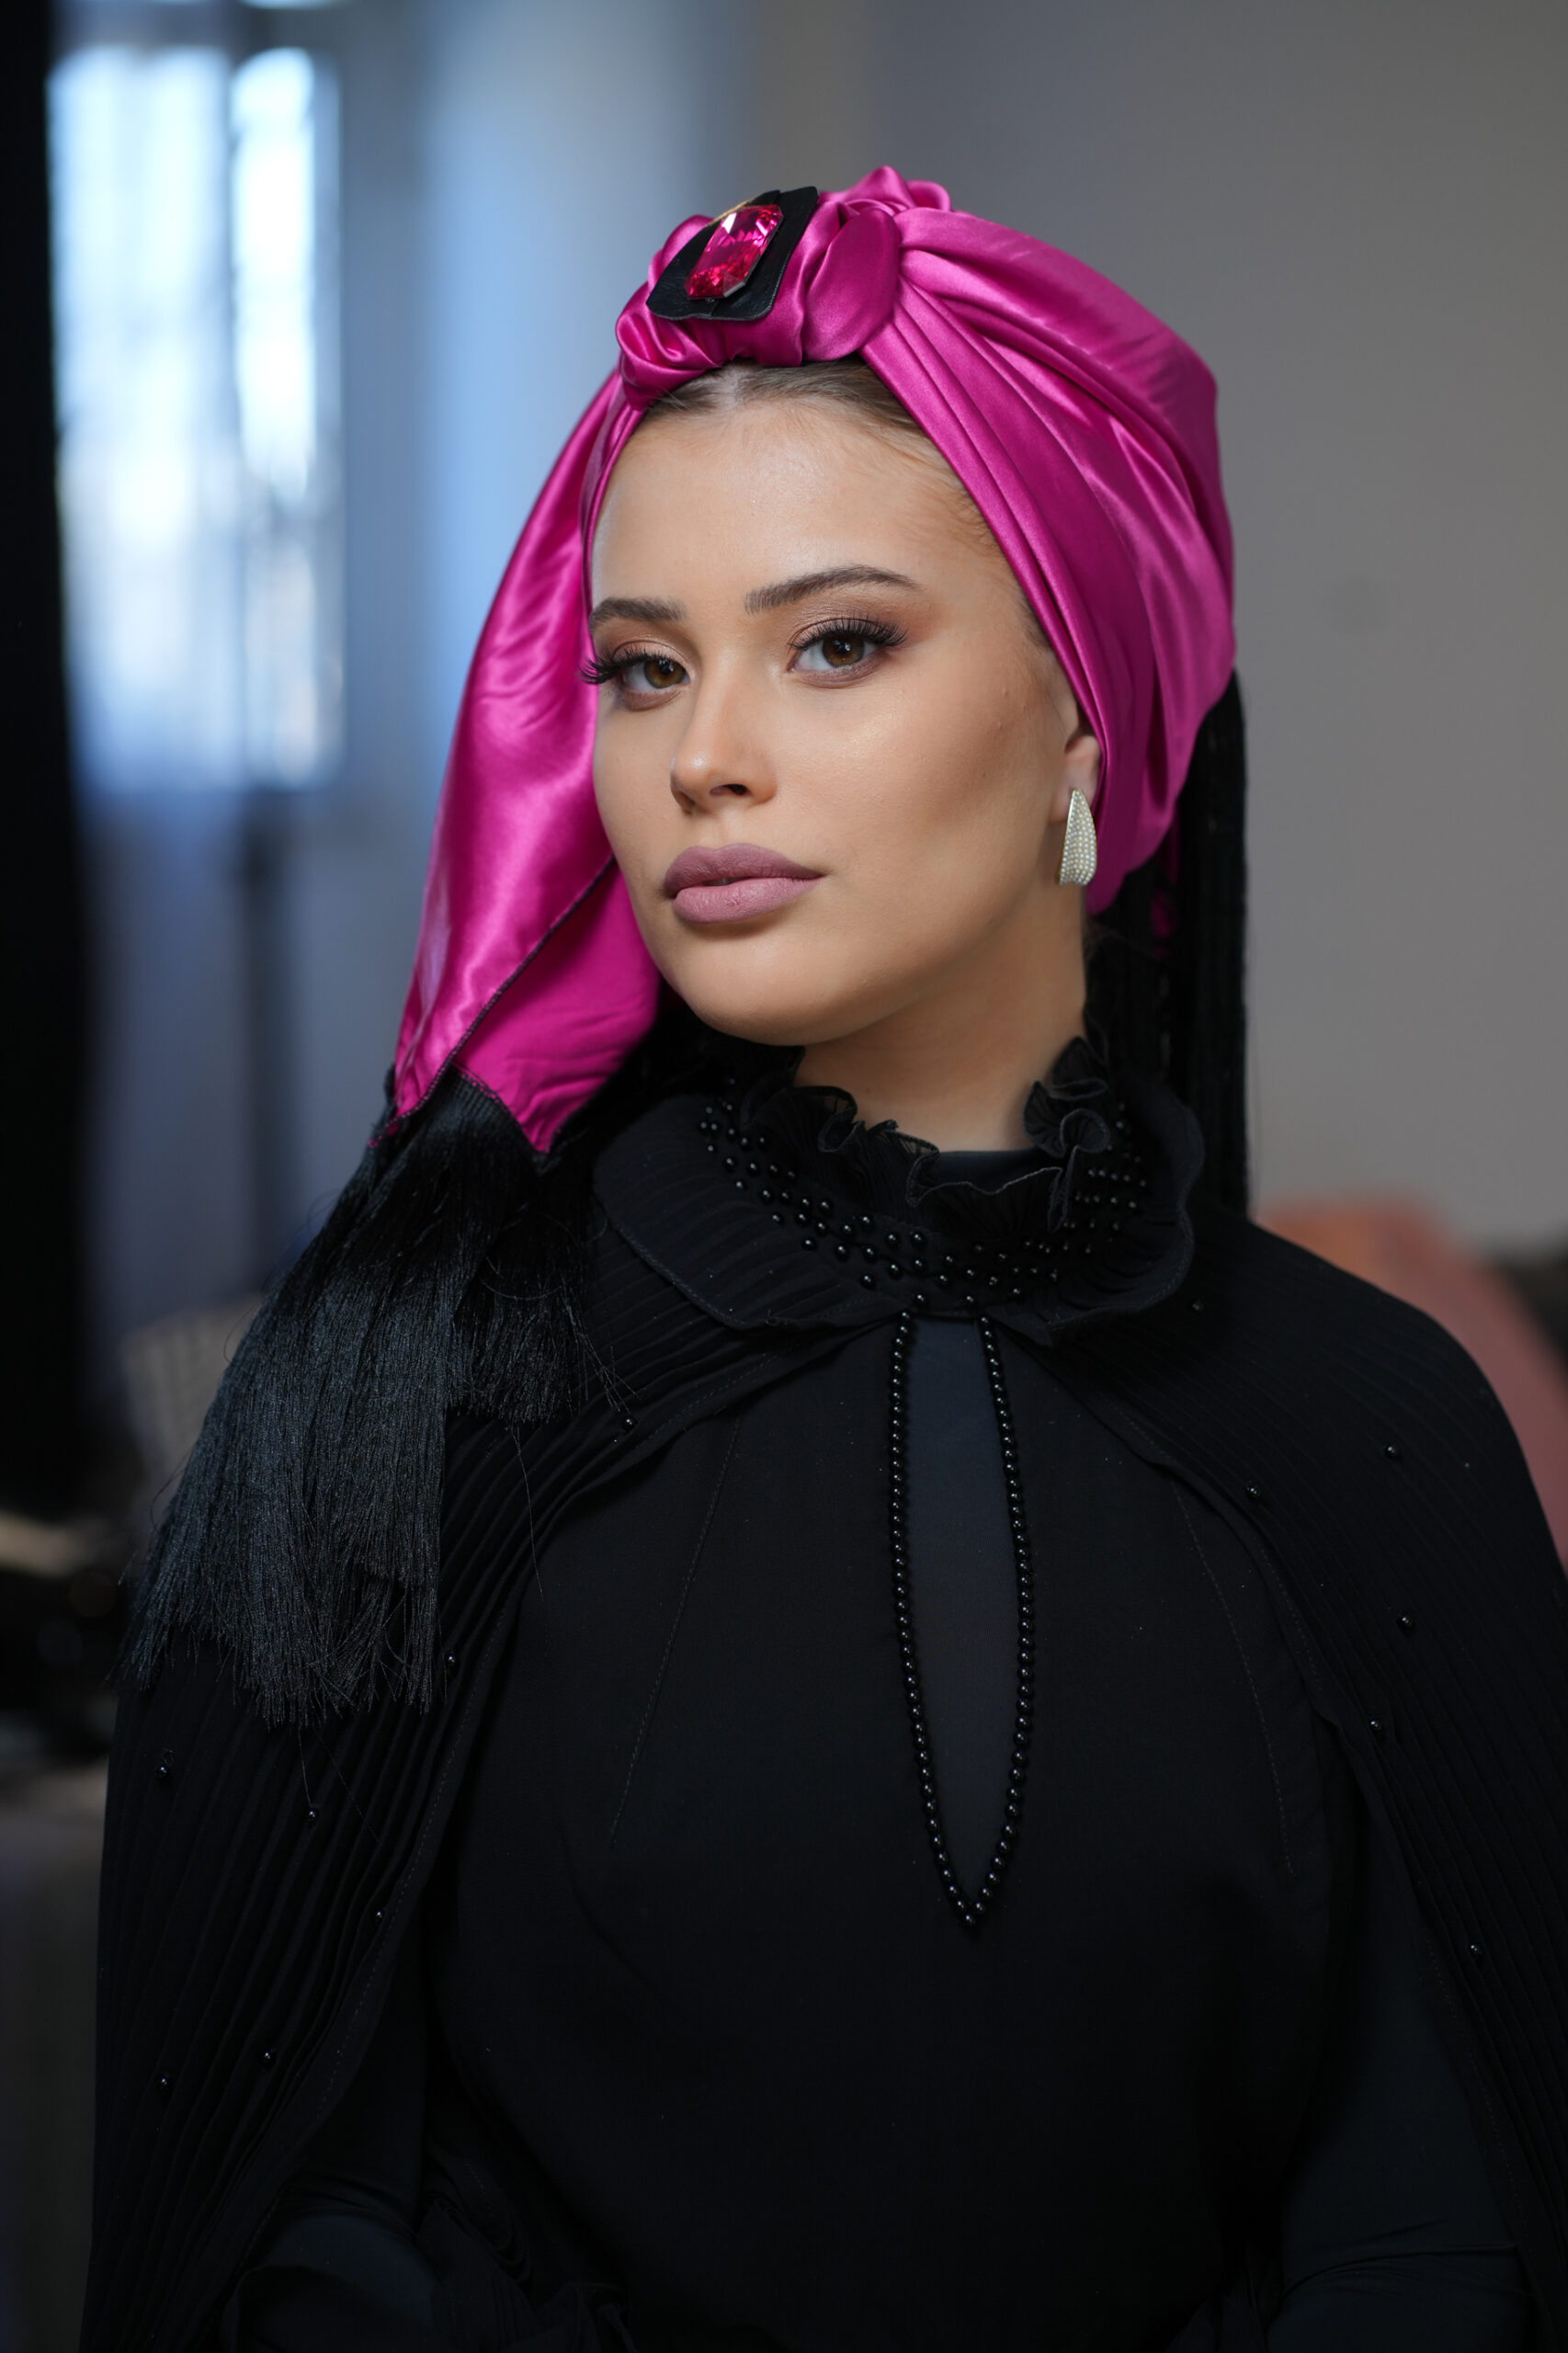 Pink Satin Headscarf with Black fringes And jewel